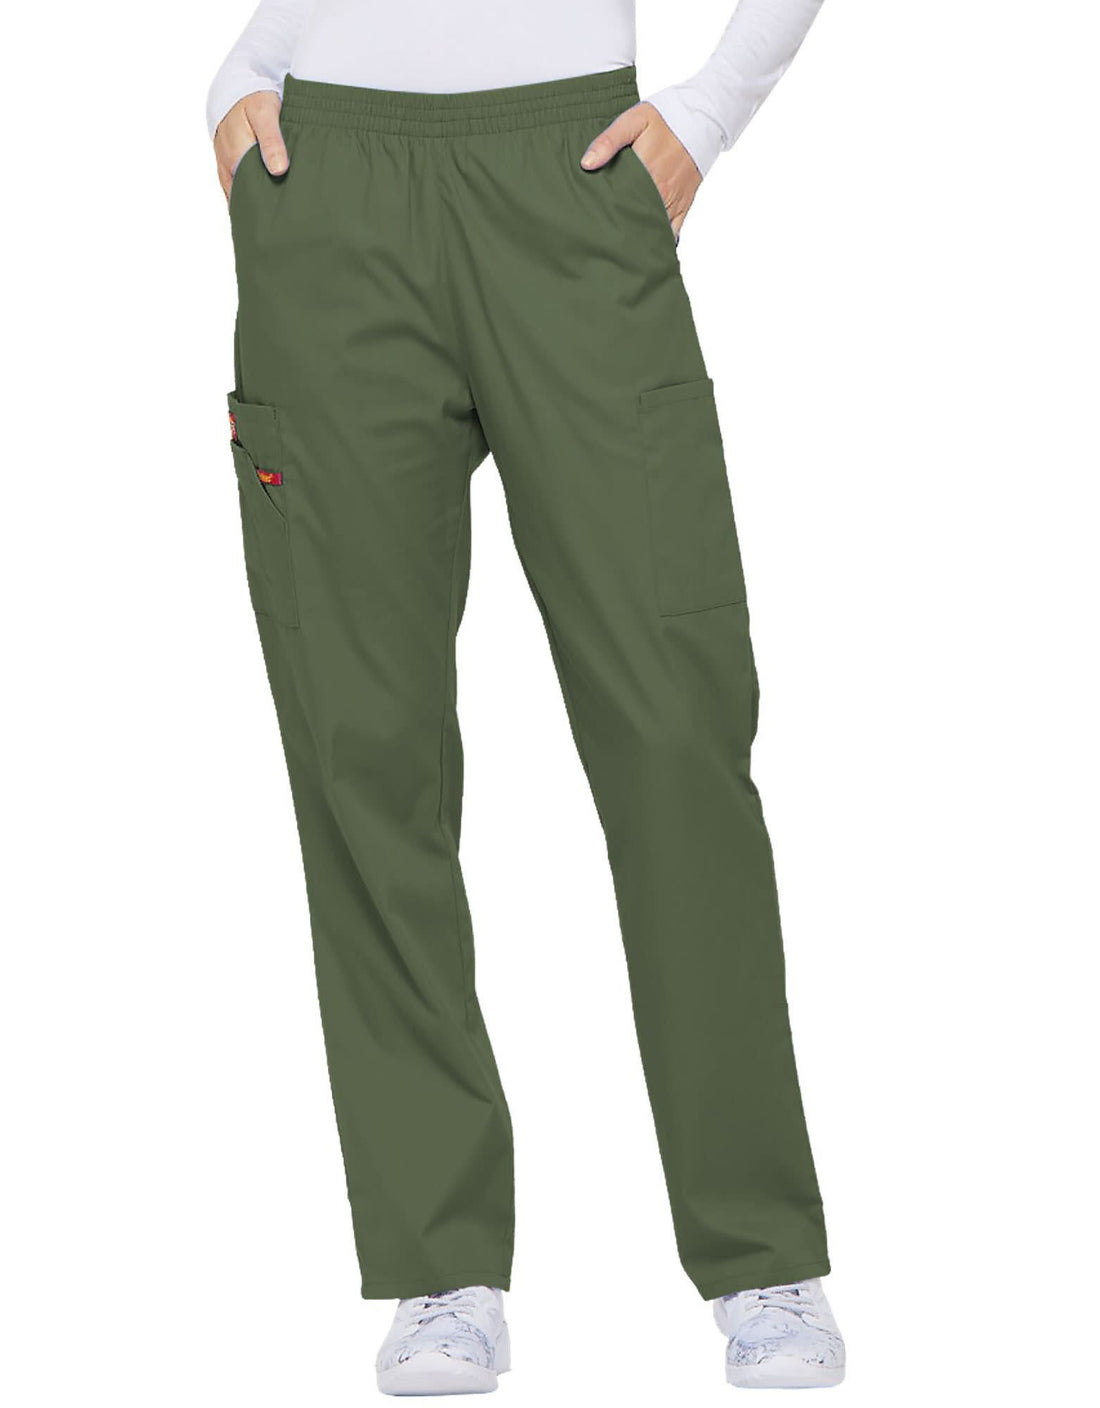 EDS Signature by Dickies Women's Mid Rise Drawstring Cargo Pant